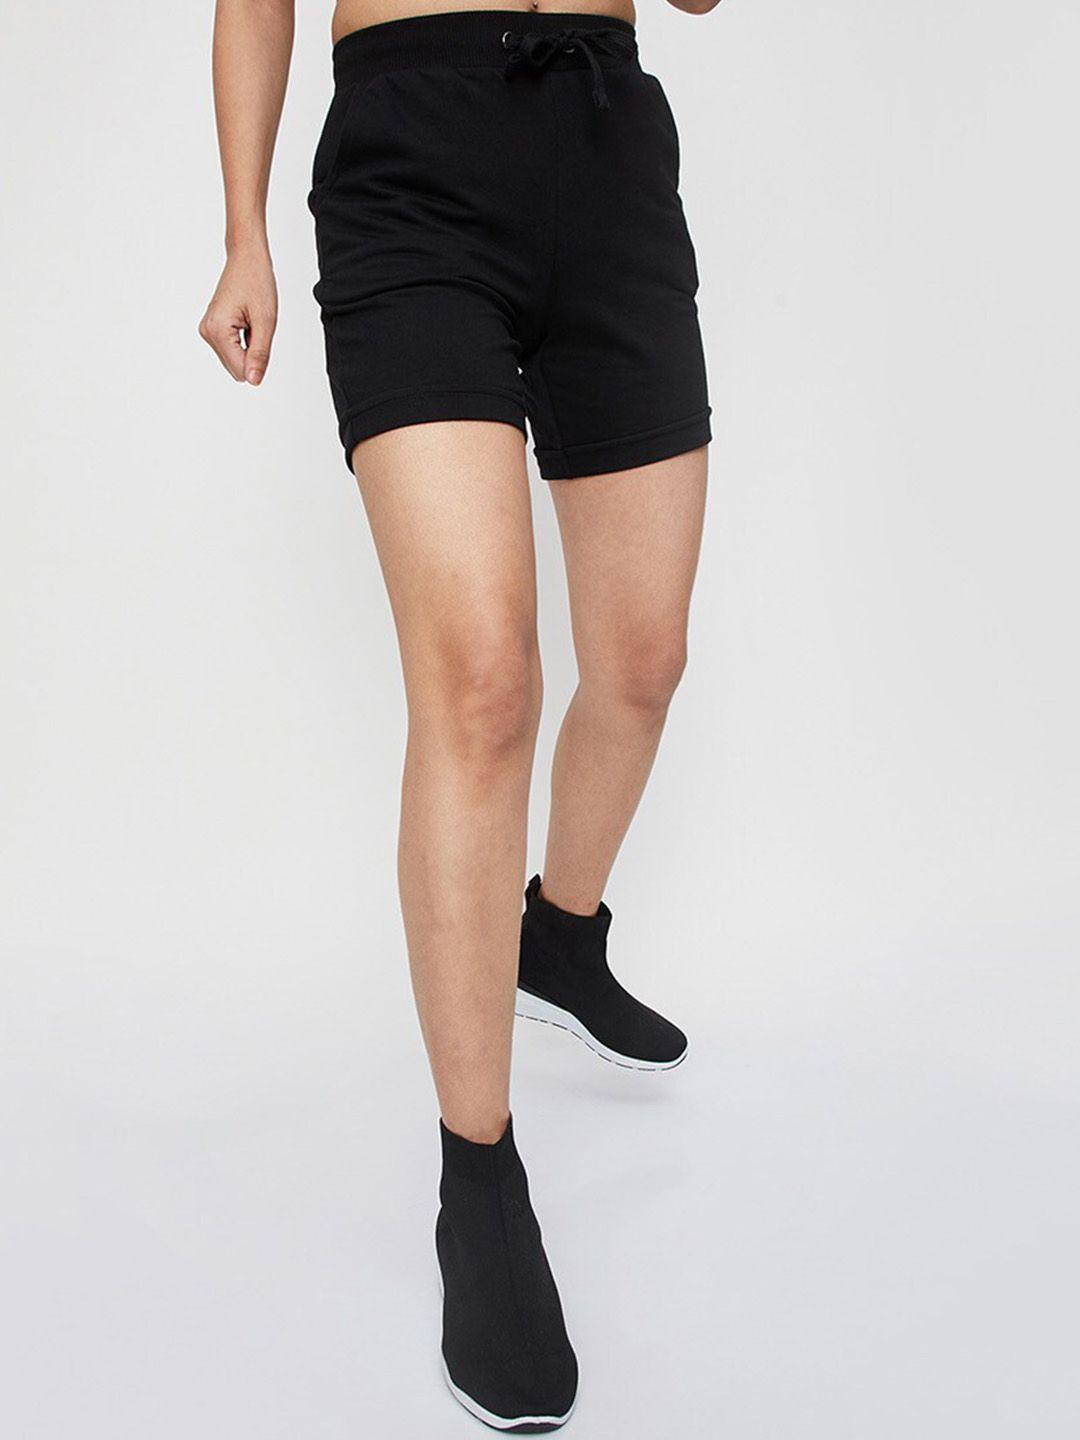 max-women-training-or-gym-cotton-sports-shorts